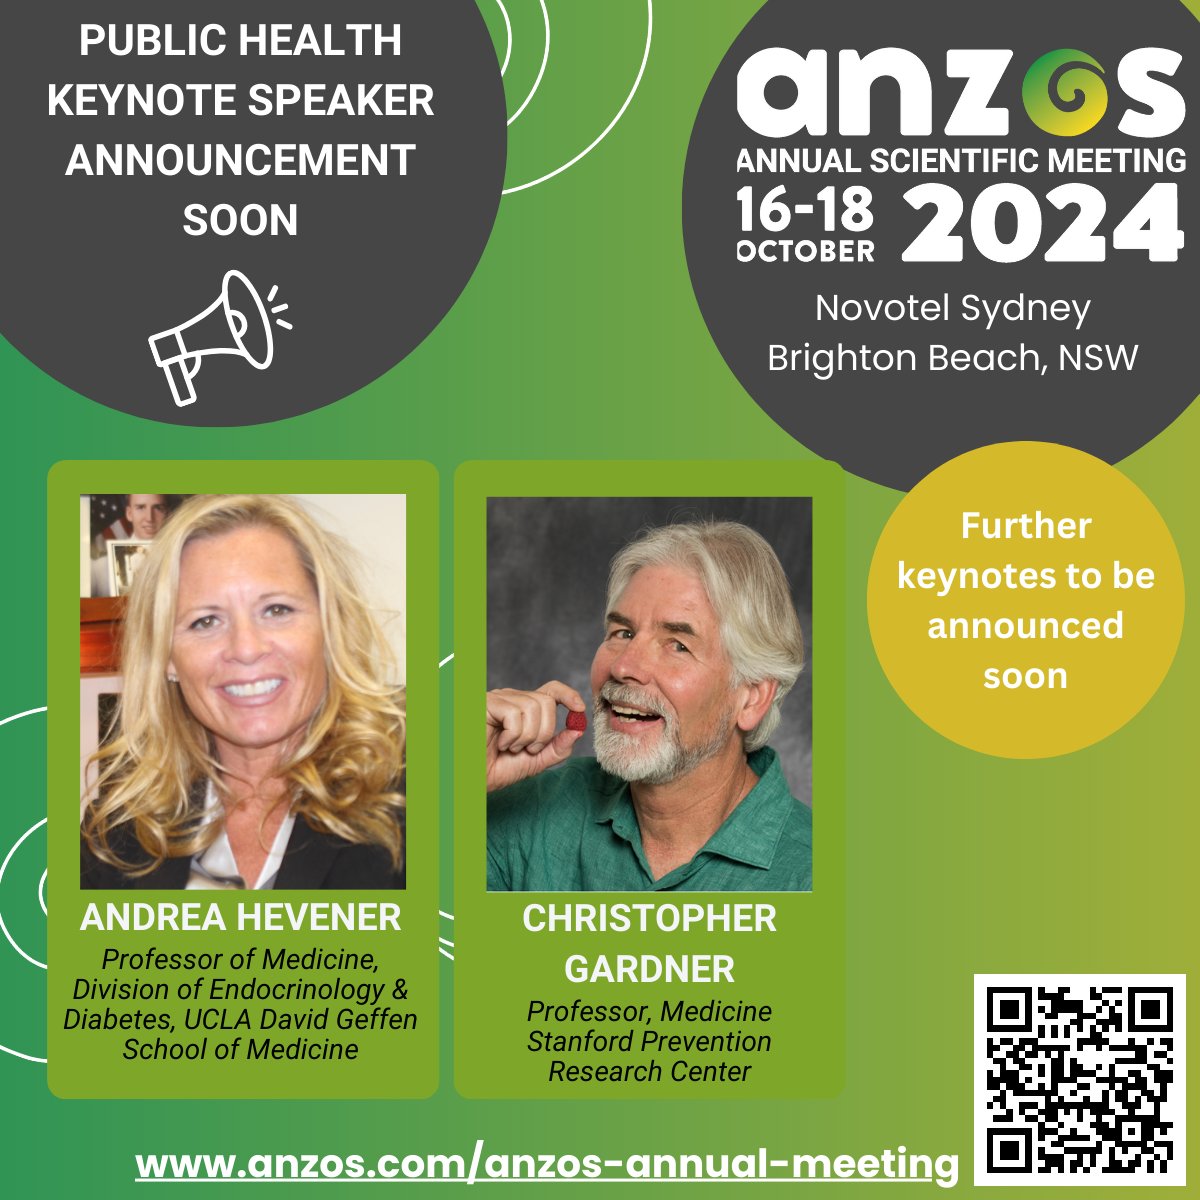 🌟Thrilled to welcome two of #ANZOS2024 Plenary speakers: @GardnerPhD and @AndreaHevener !! Two leading researchers in nutrition and metabolism. We are honored to have you! Watch this space for 2 additional Plenary speakers to be announced soon! Sydney 16-18 October👇🇦🇺🇳🇿🔬👩‍🎓